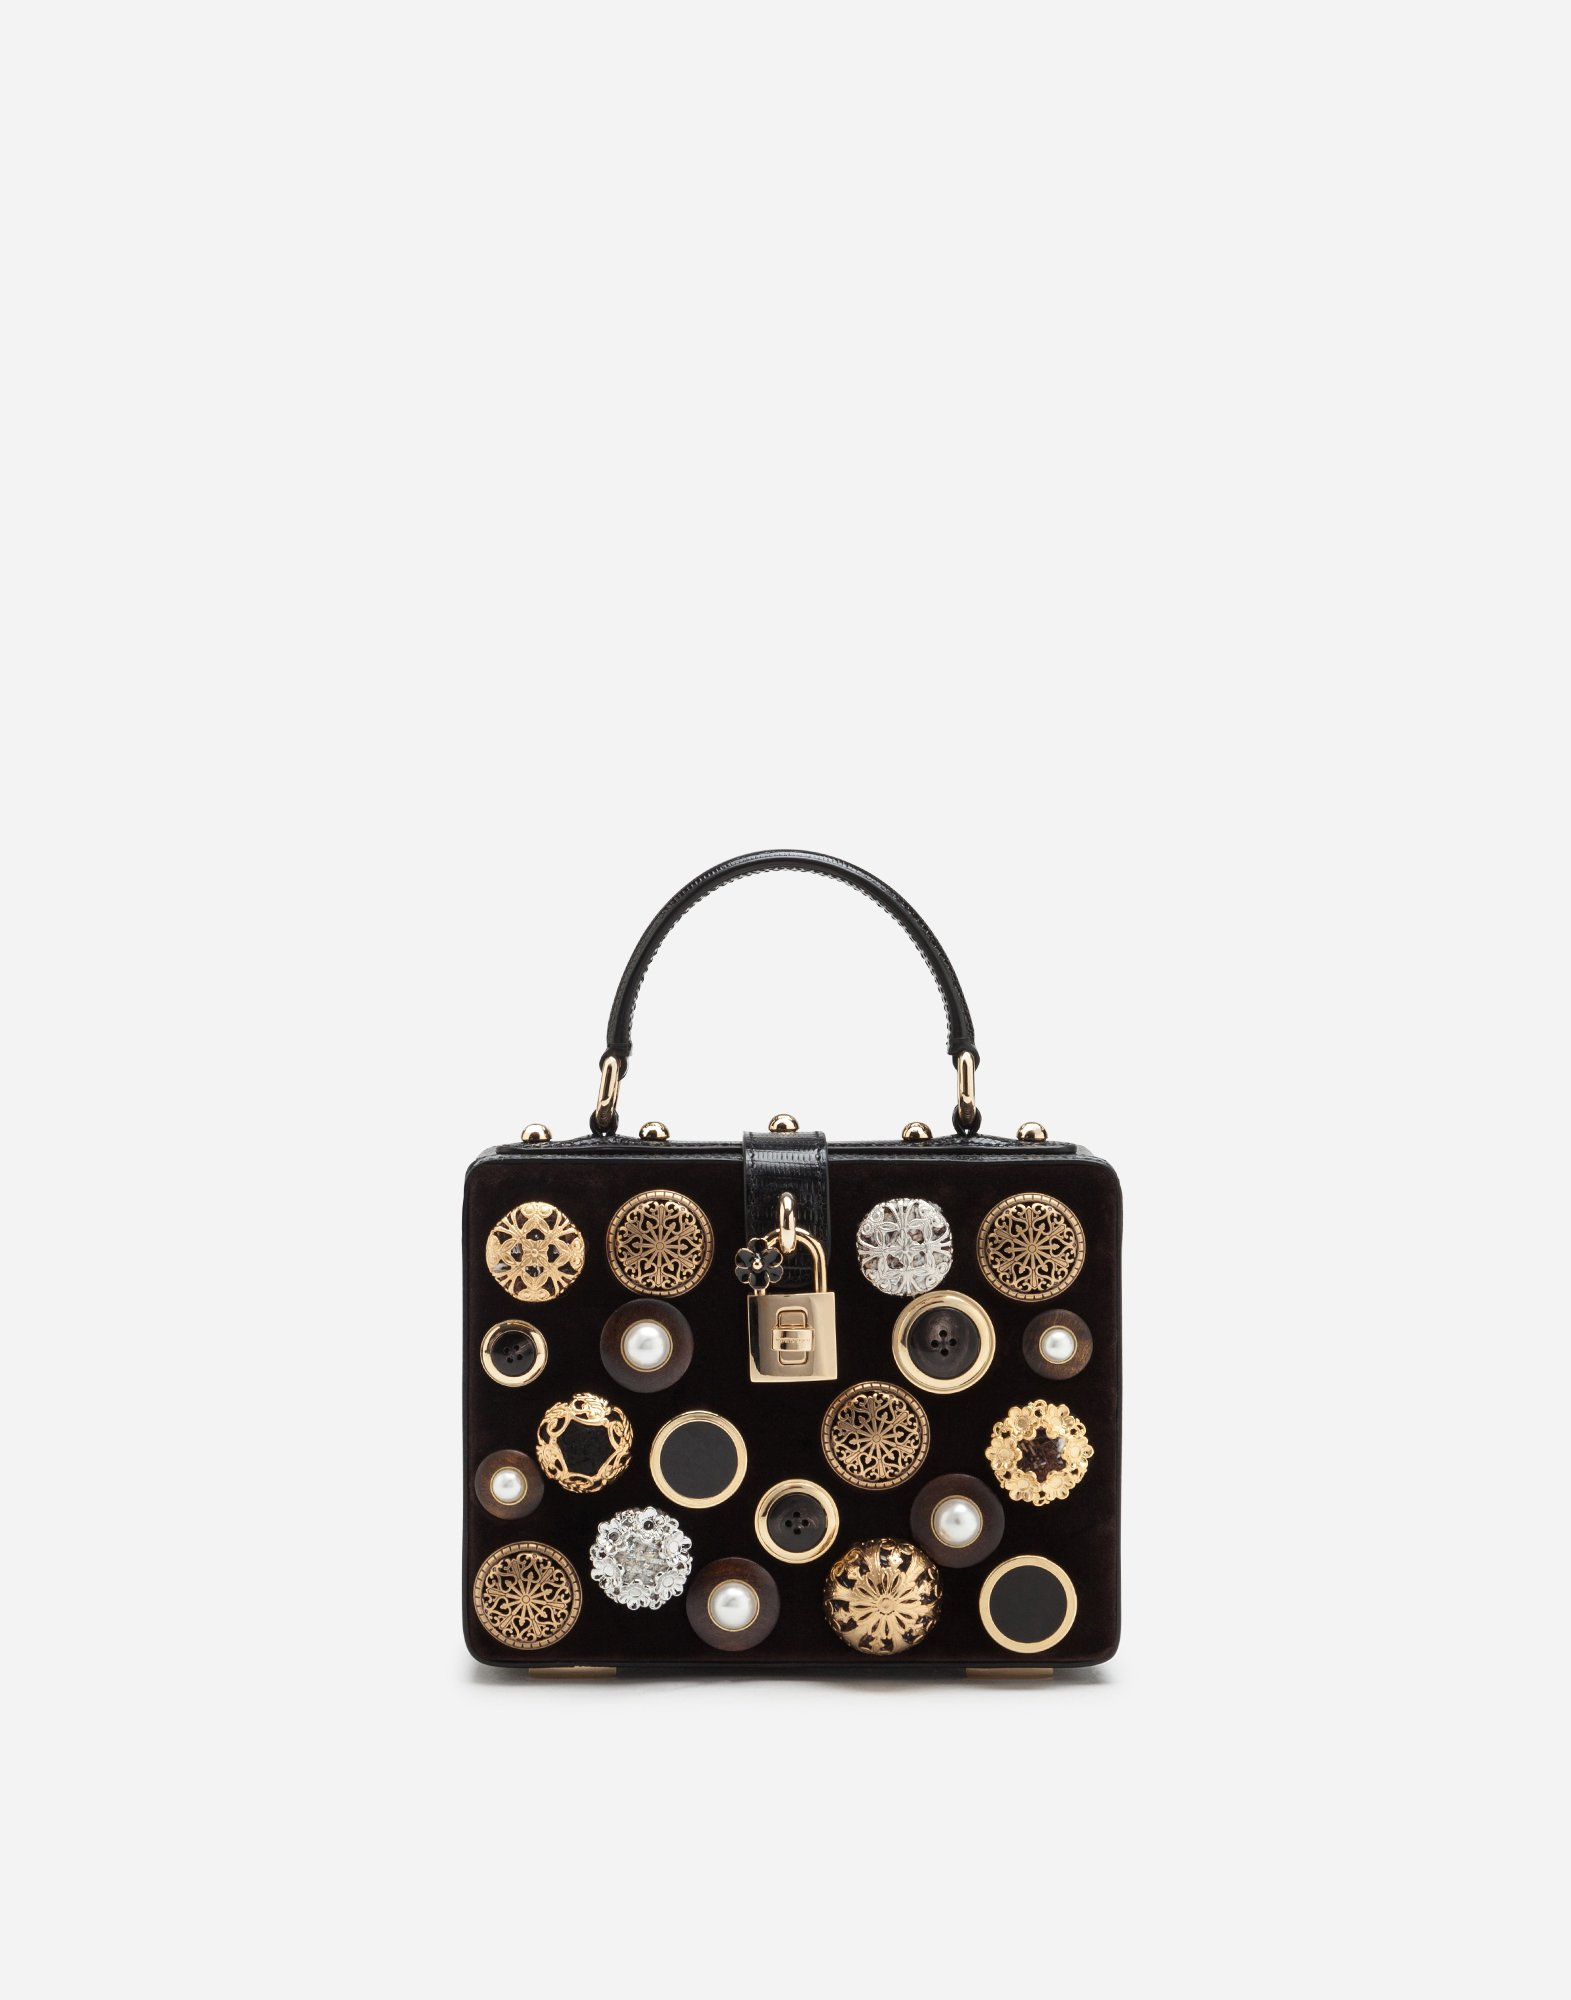 DOLCE & GABBANA DOLCE BOX BAG IN VELVET WITH EMBROIDERY